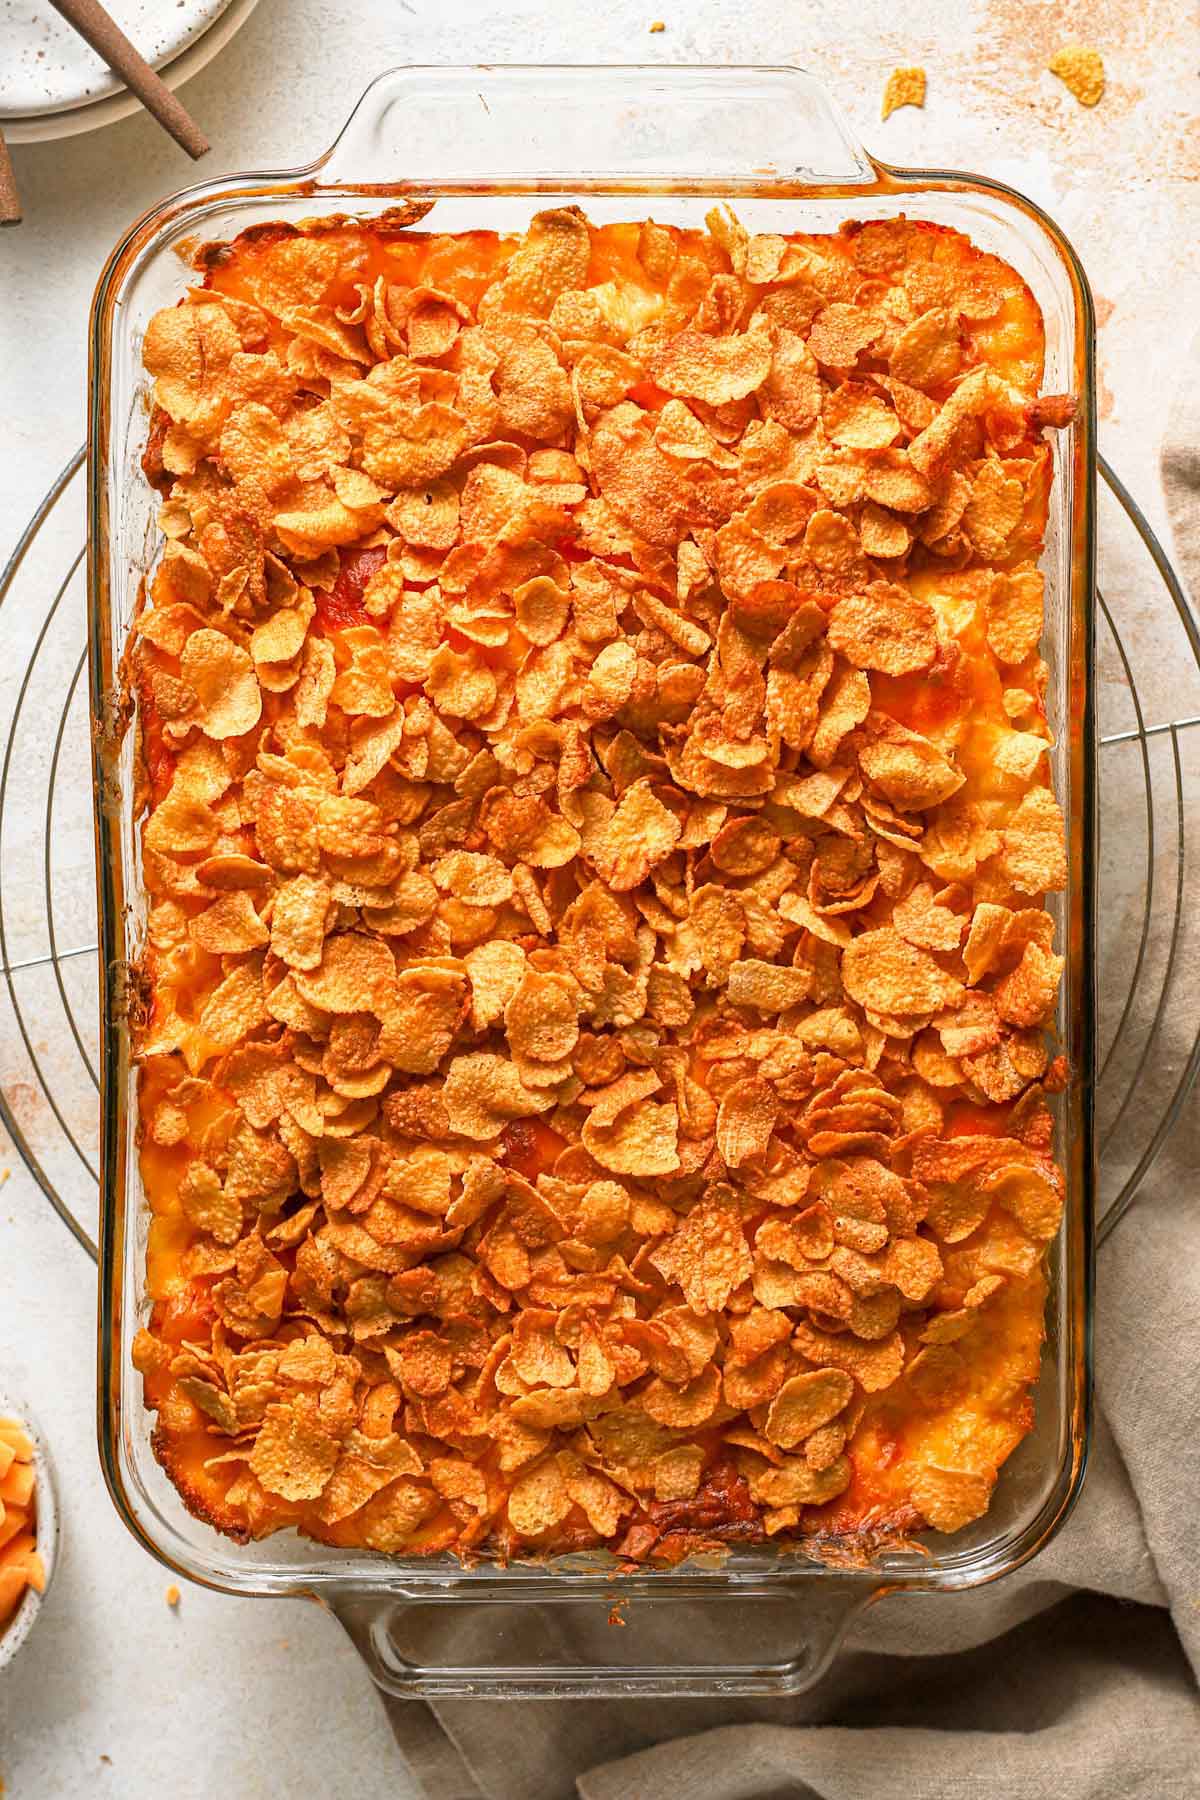 Overhead photo of baked cheesy potato casserole in a glass baking dish.